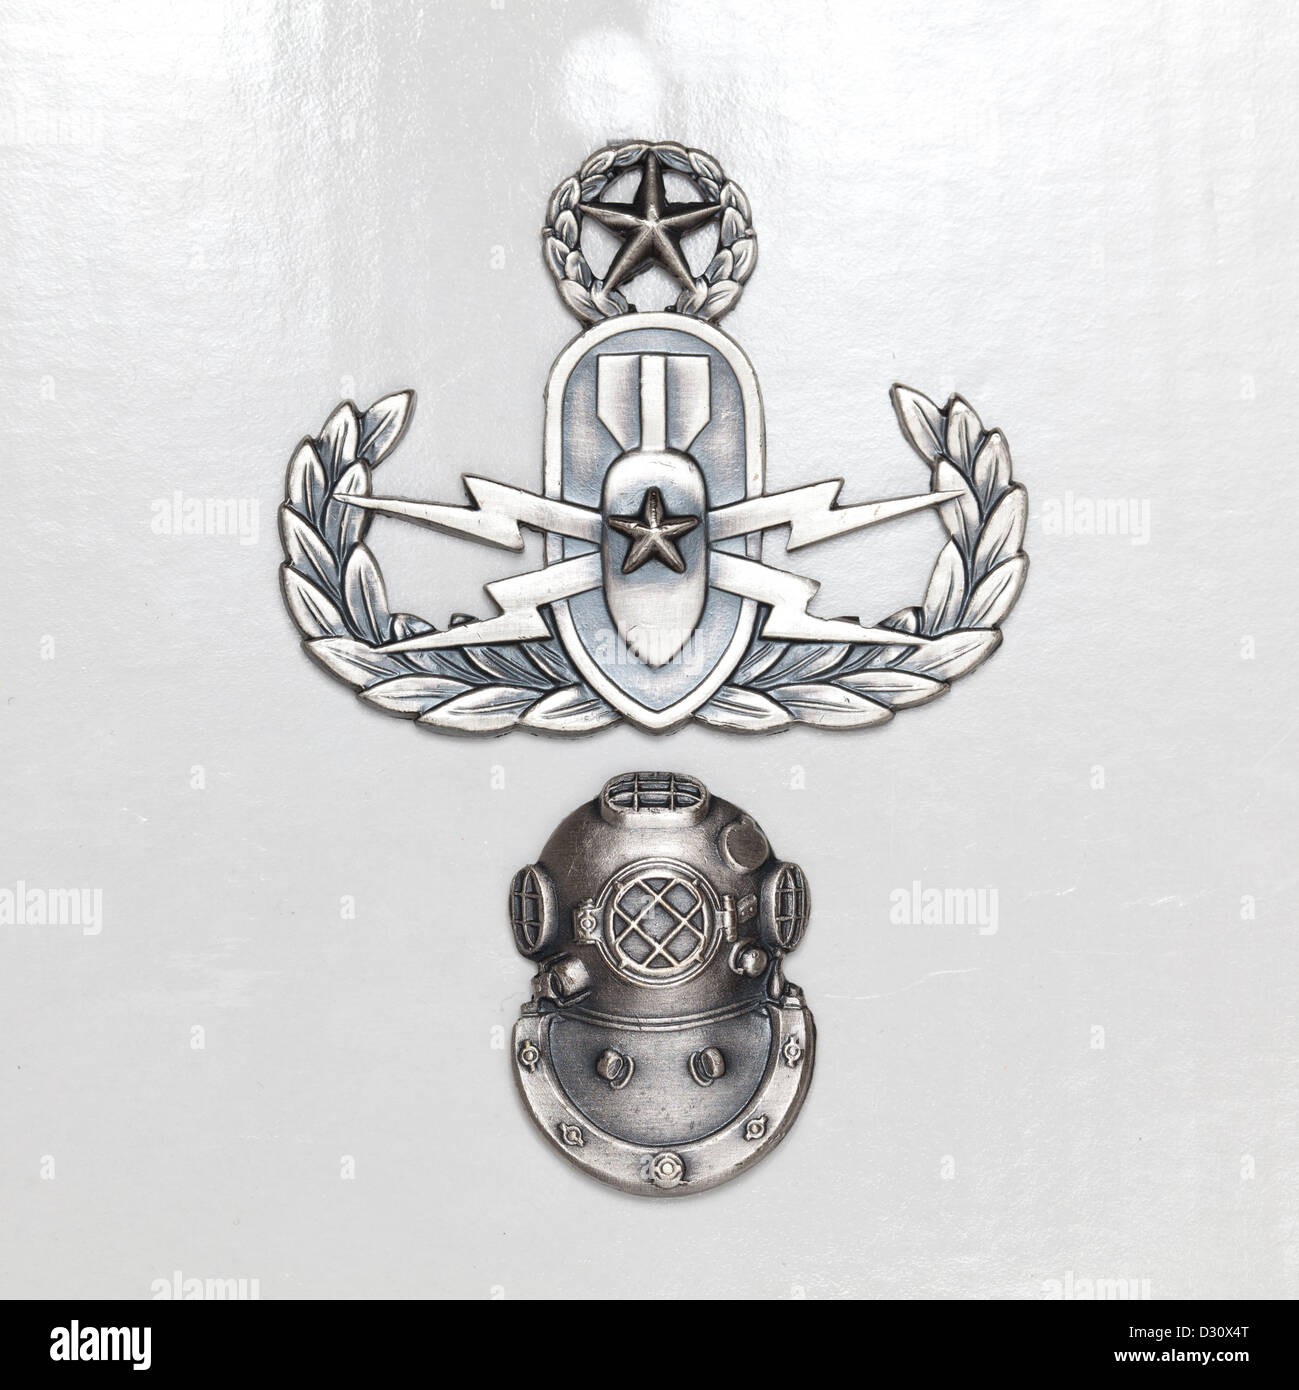 Master Explosive Ordnance Disposal (EOD) badge over 2nd Class Diver badge Stock Photo